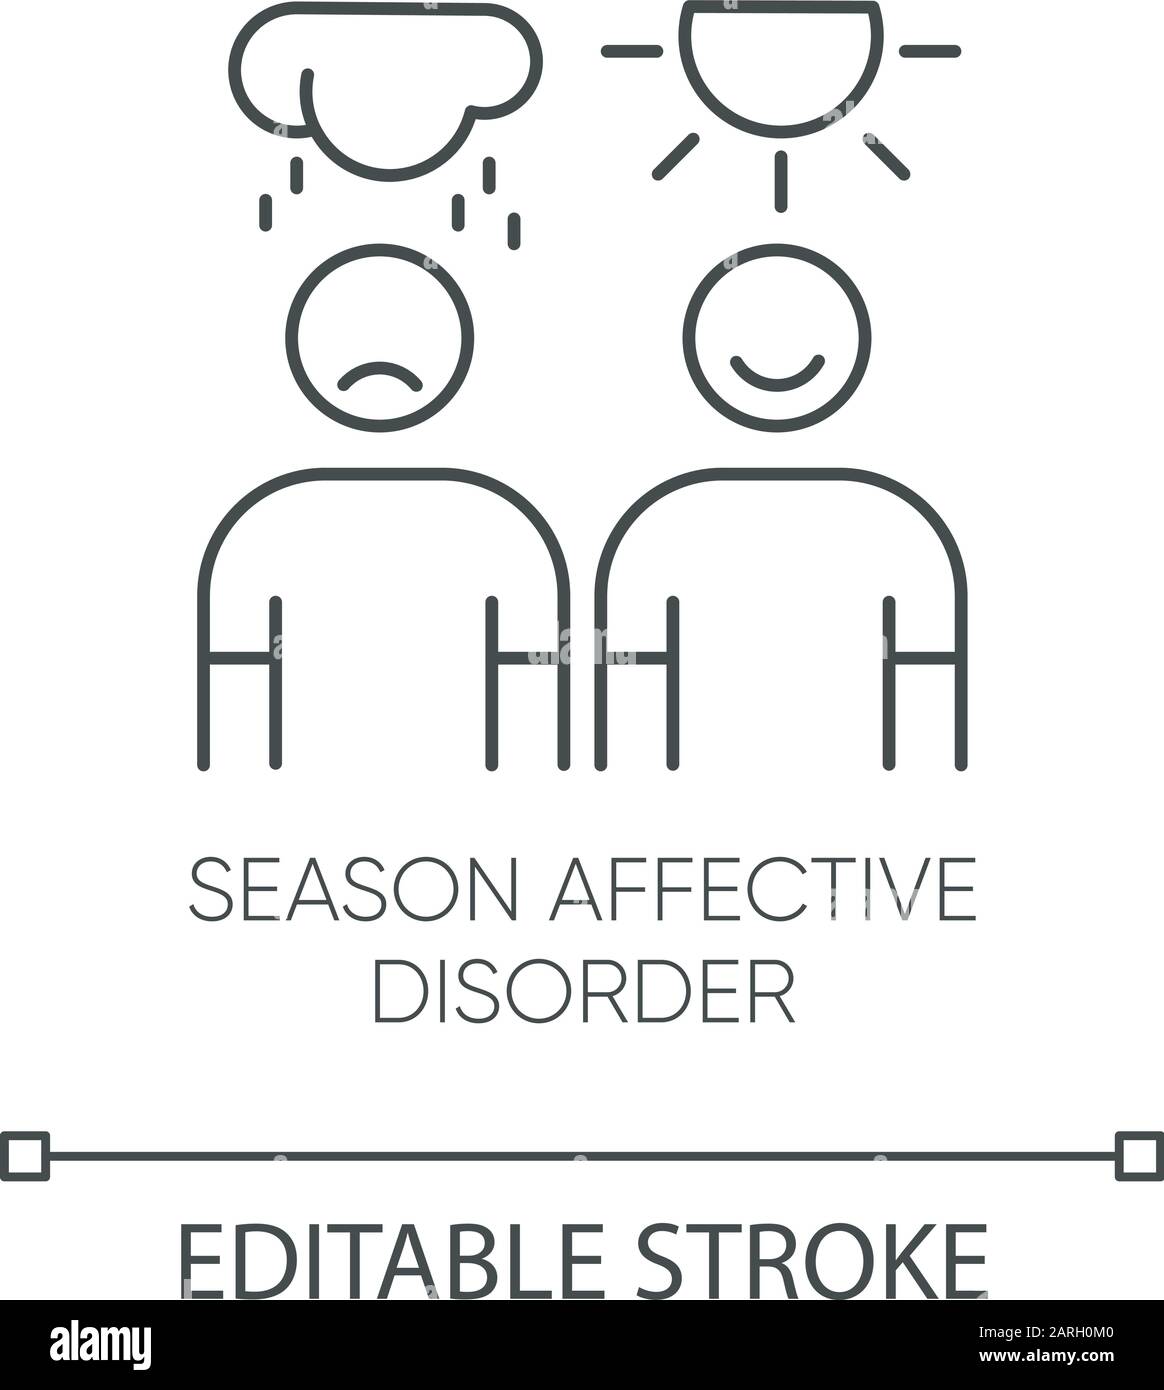 Seasonal affective disorder linear icon. Emotional change. Manic, depressive episodes. Anxiety. Mental health. Thin line illustration. Contour symbol. Stock Vector